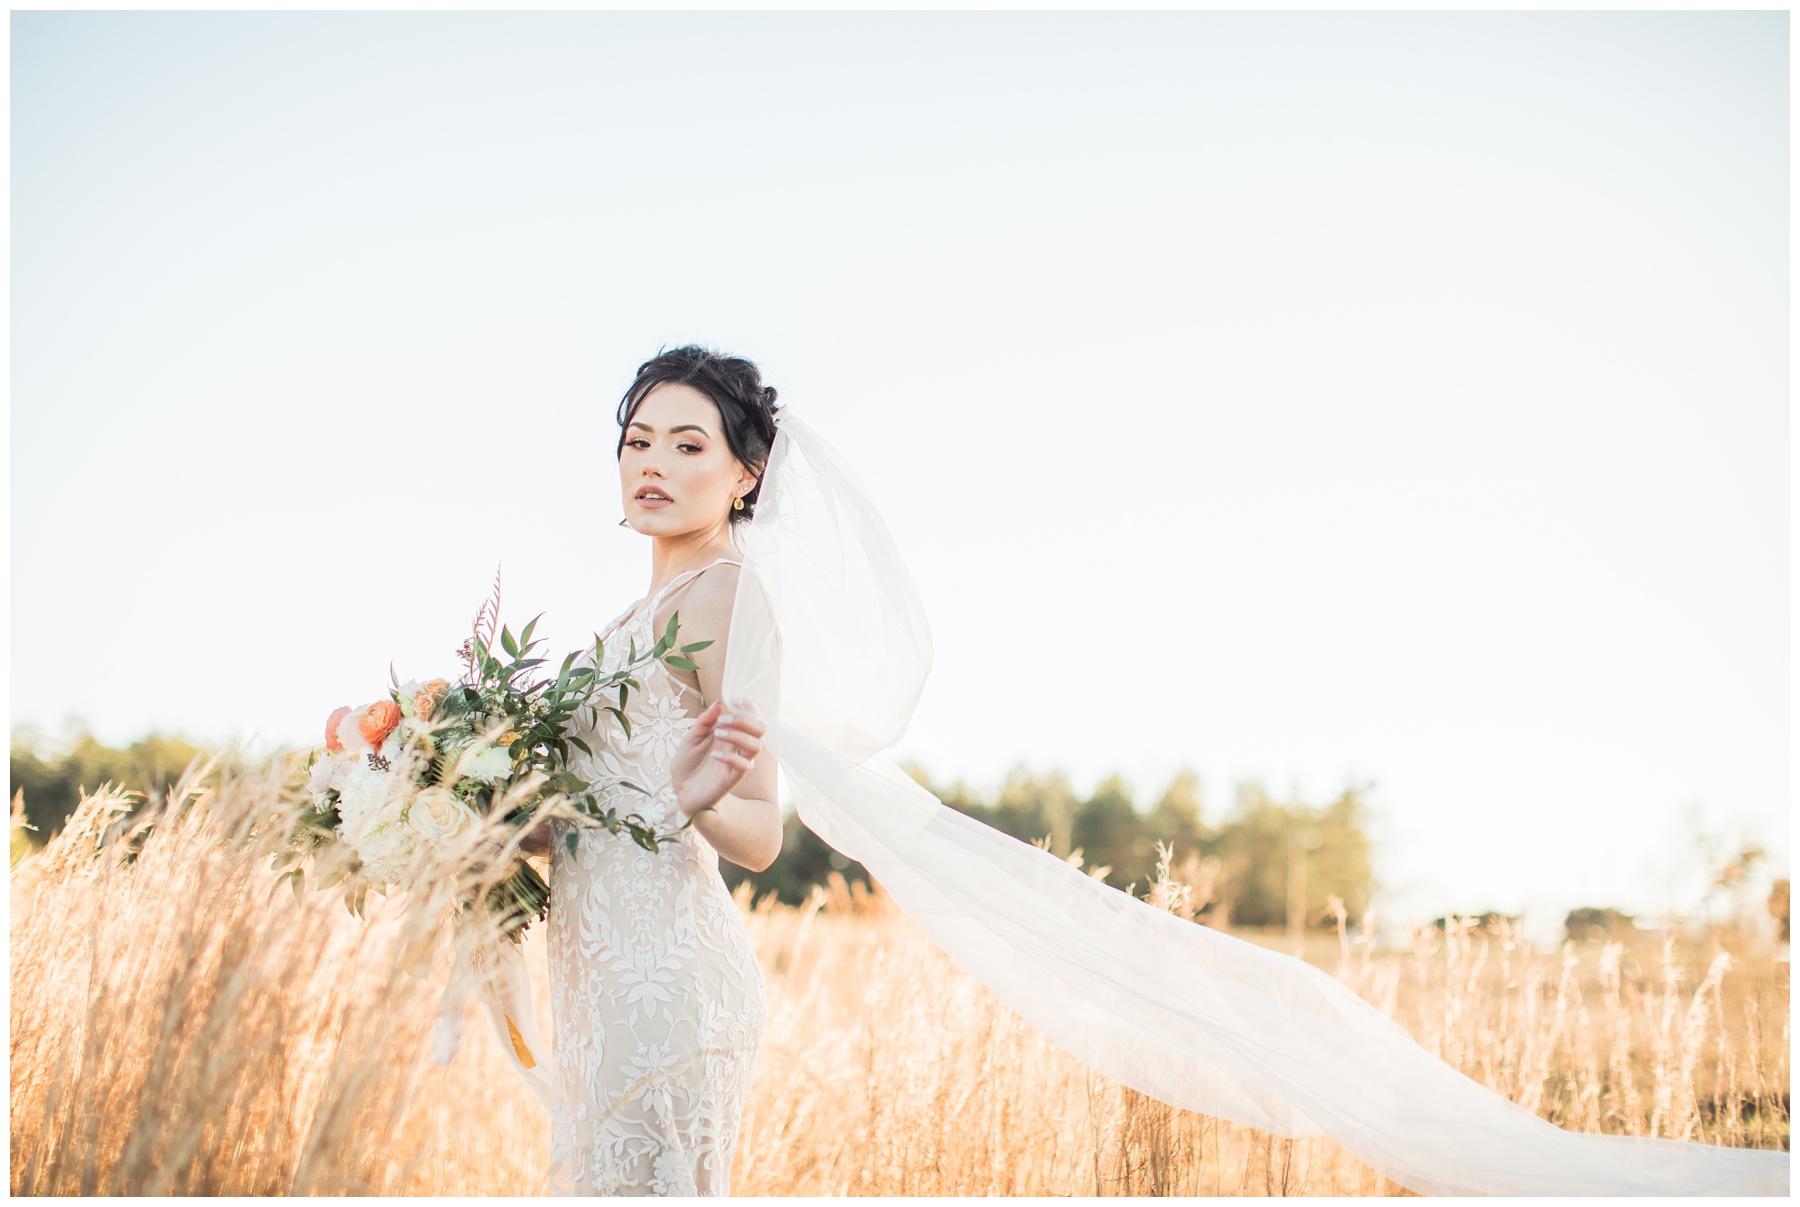 Bride in a sleeveless lace wedding gown with floral motifs by BHLDN